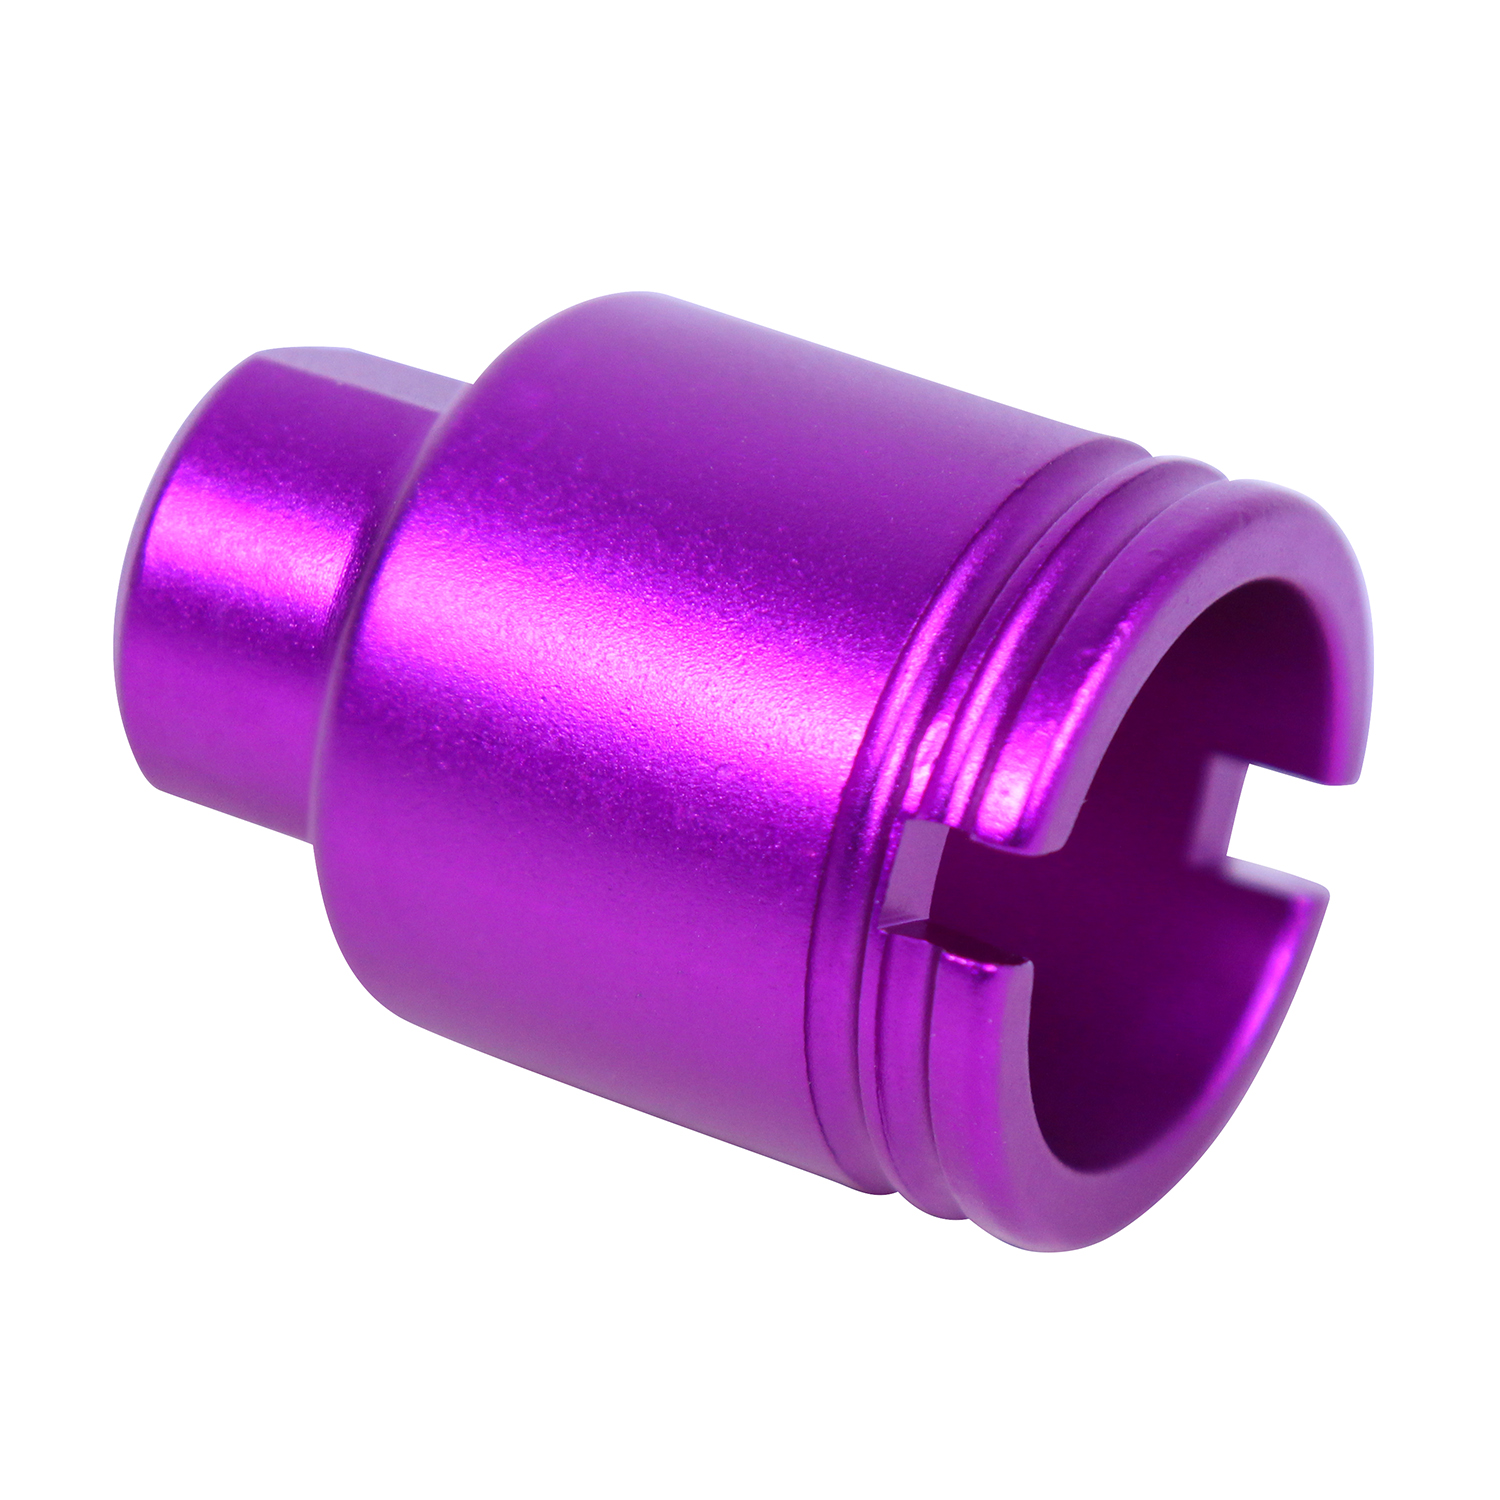 AR 9mm Stubby Slim Compact Flash Can (Anodized Purple)